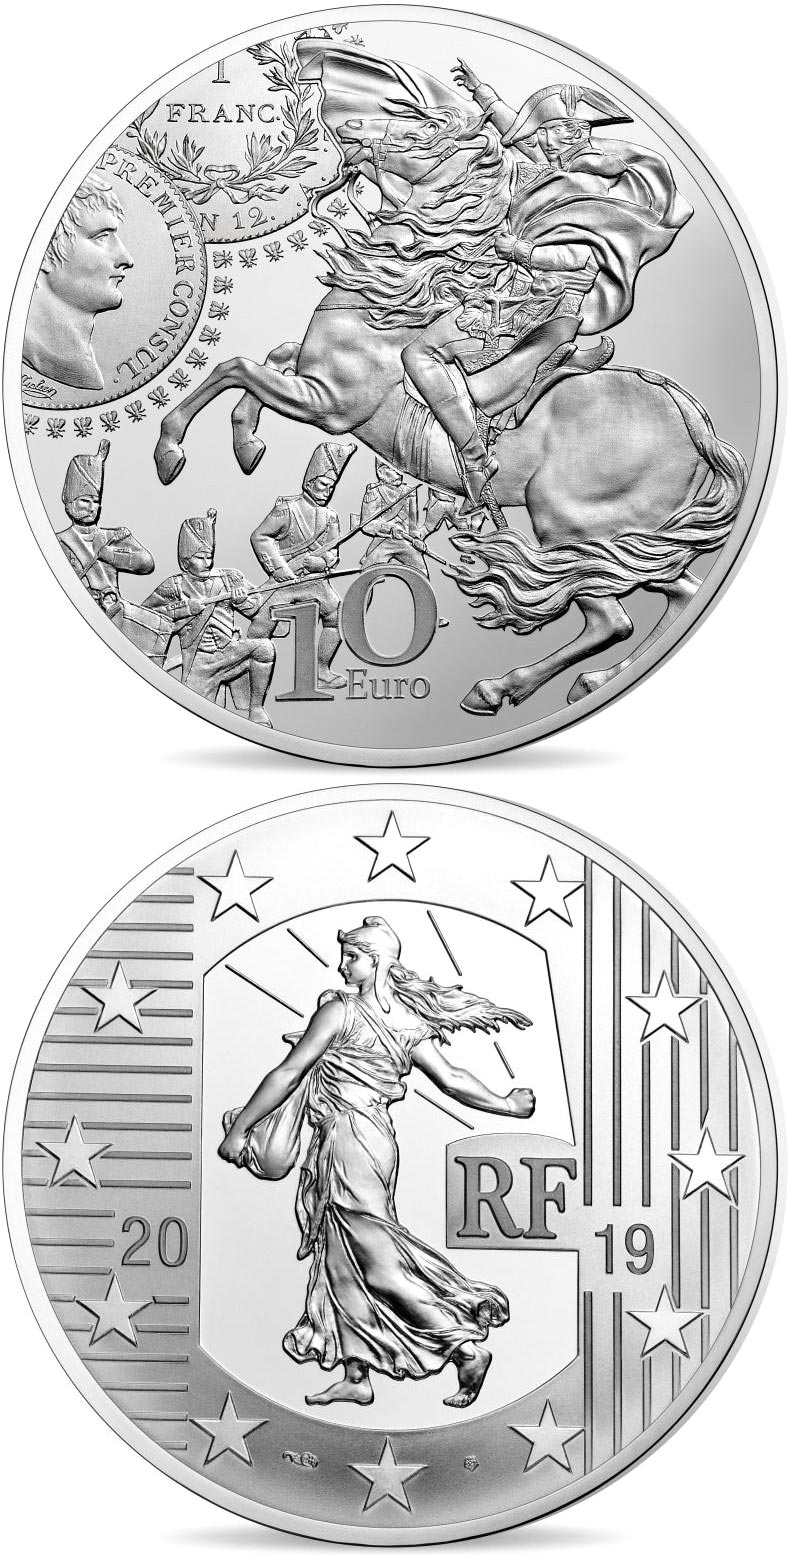 Image of 10 euro coin - The Franc Germinal | France 2019.  The Silver coin is of Proof quality.